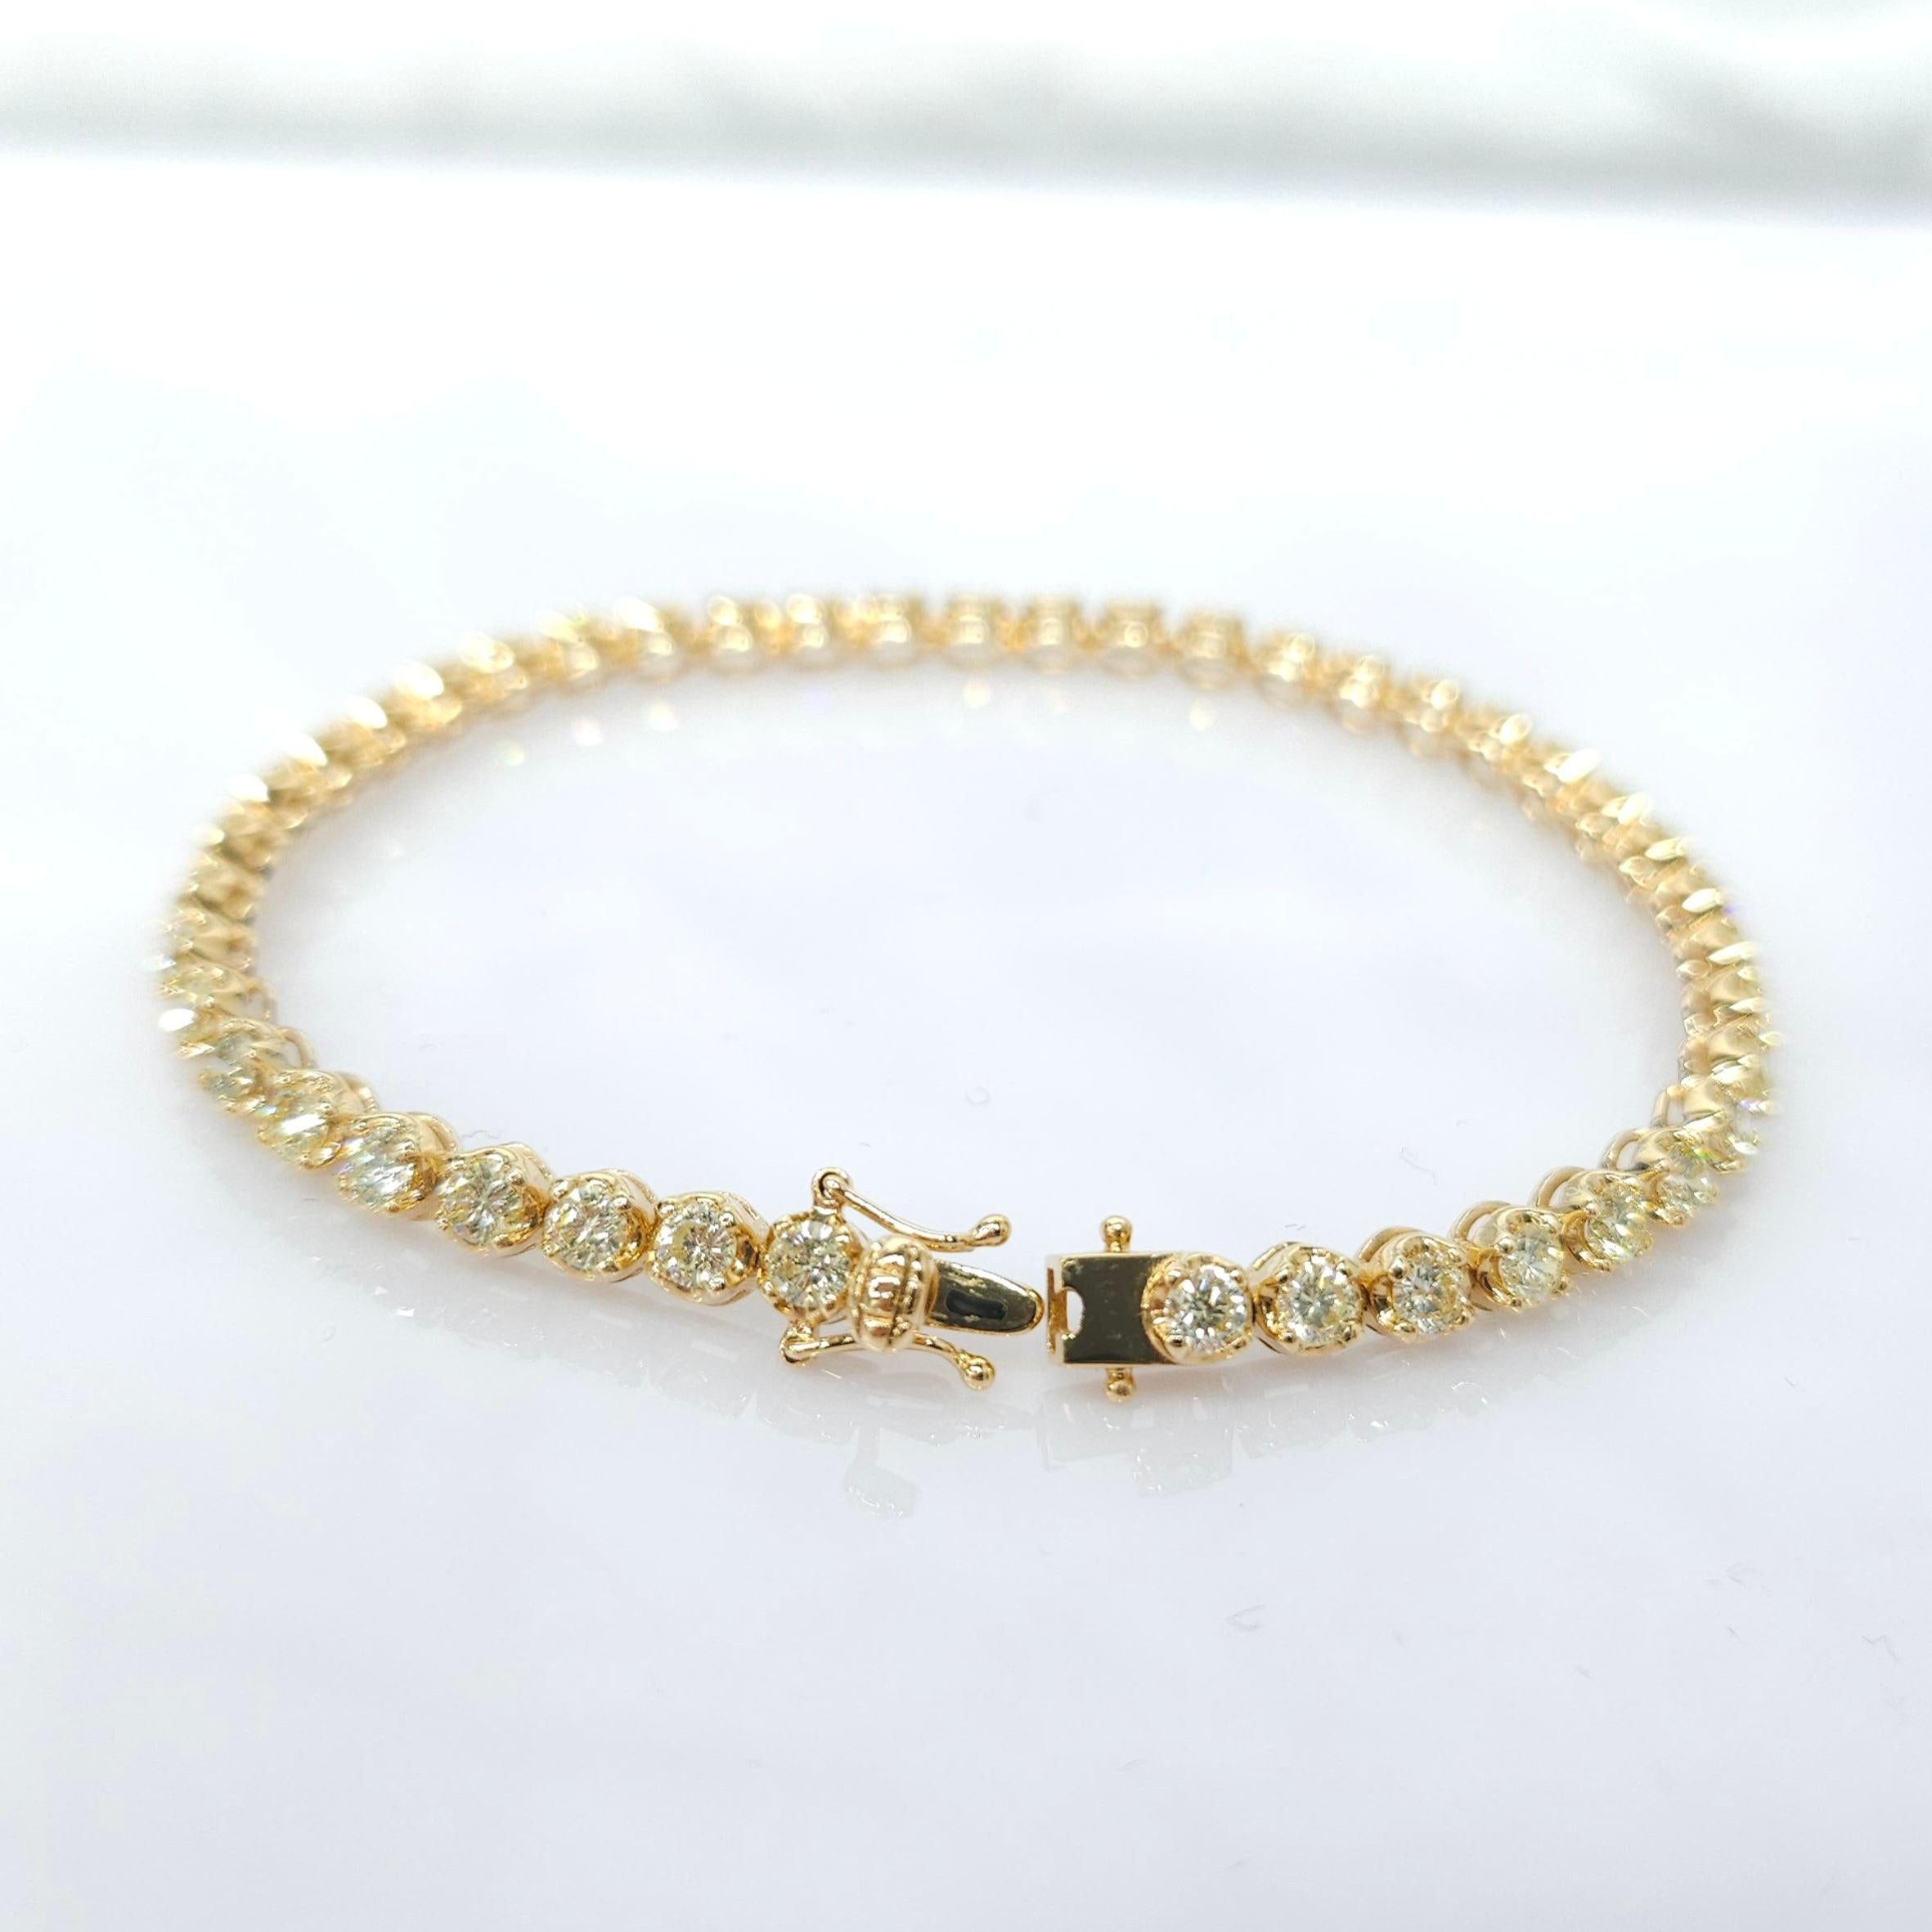 Elevate your jewelry collection with the exquisite beauty of this 3.50 Carat Total Round Diamond Tennis Bracelet in 18K Yellow Gold. This stunning piece is designed to captivate and dazzle with its innovative new design and impeccable